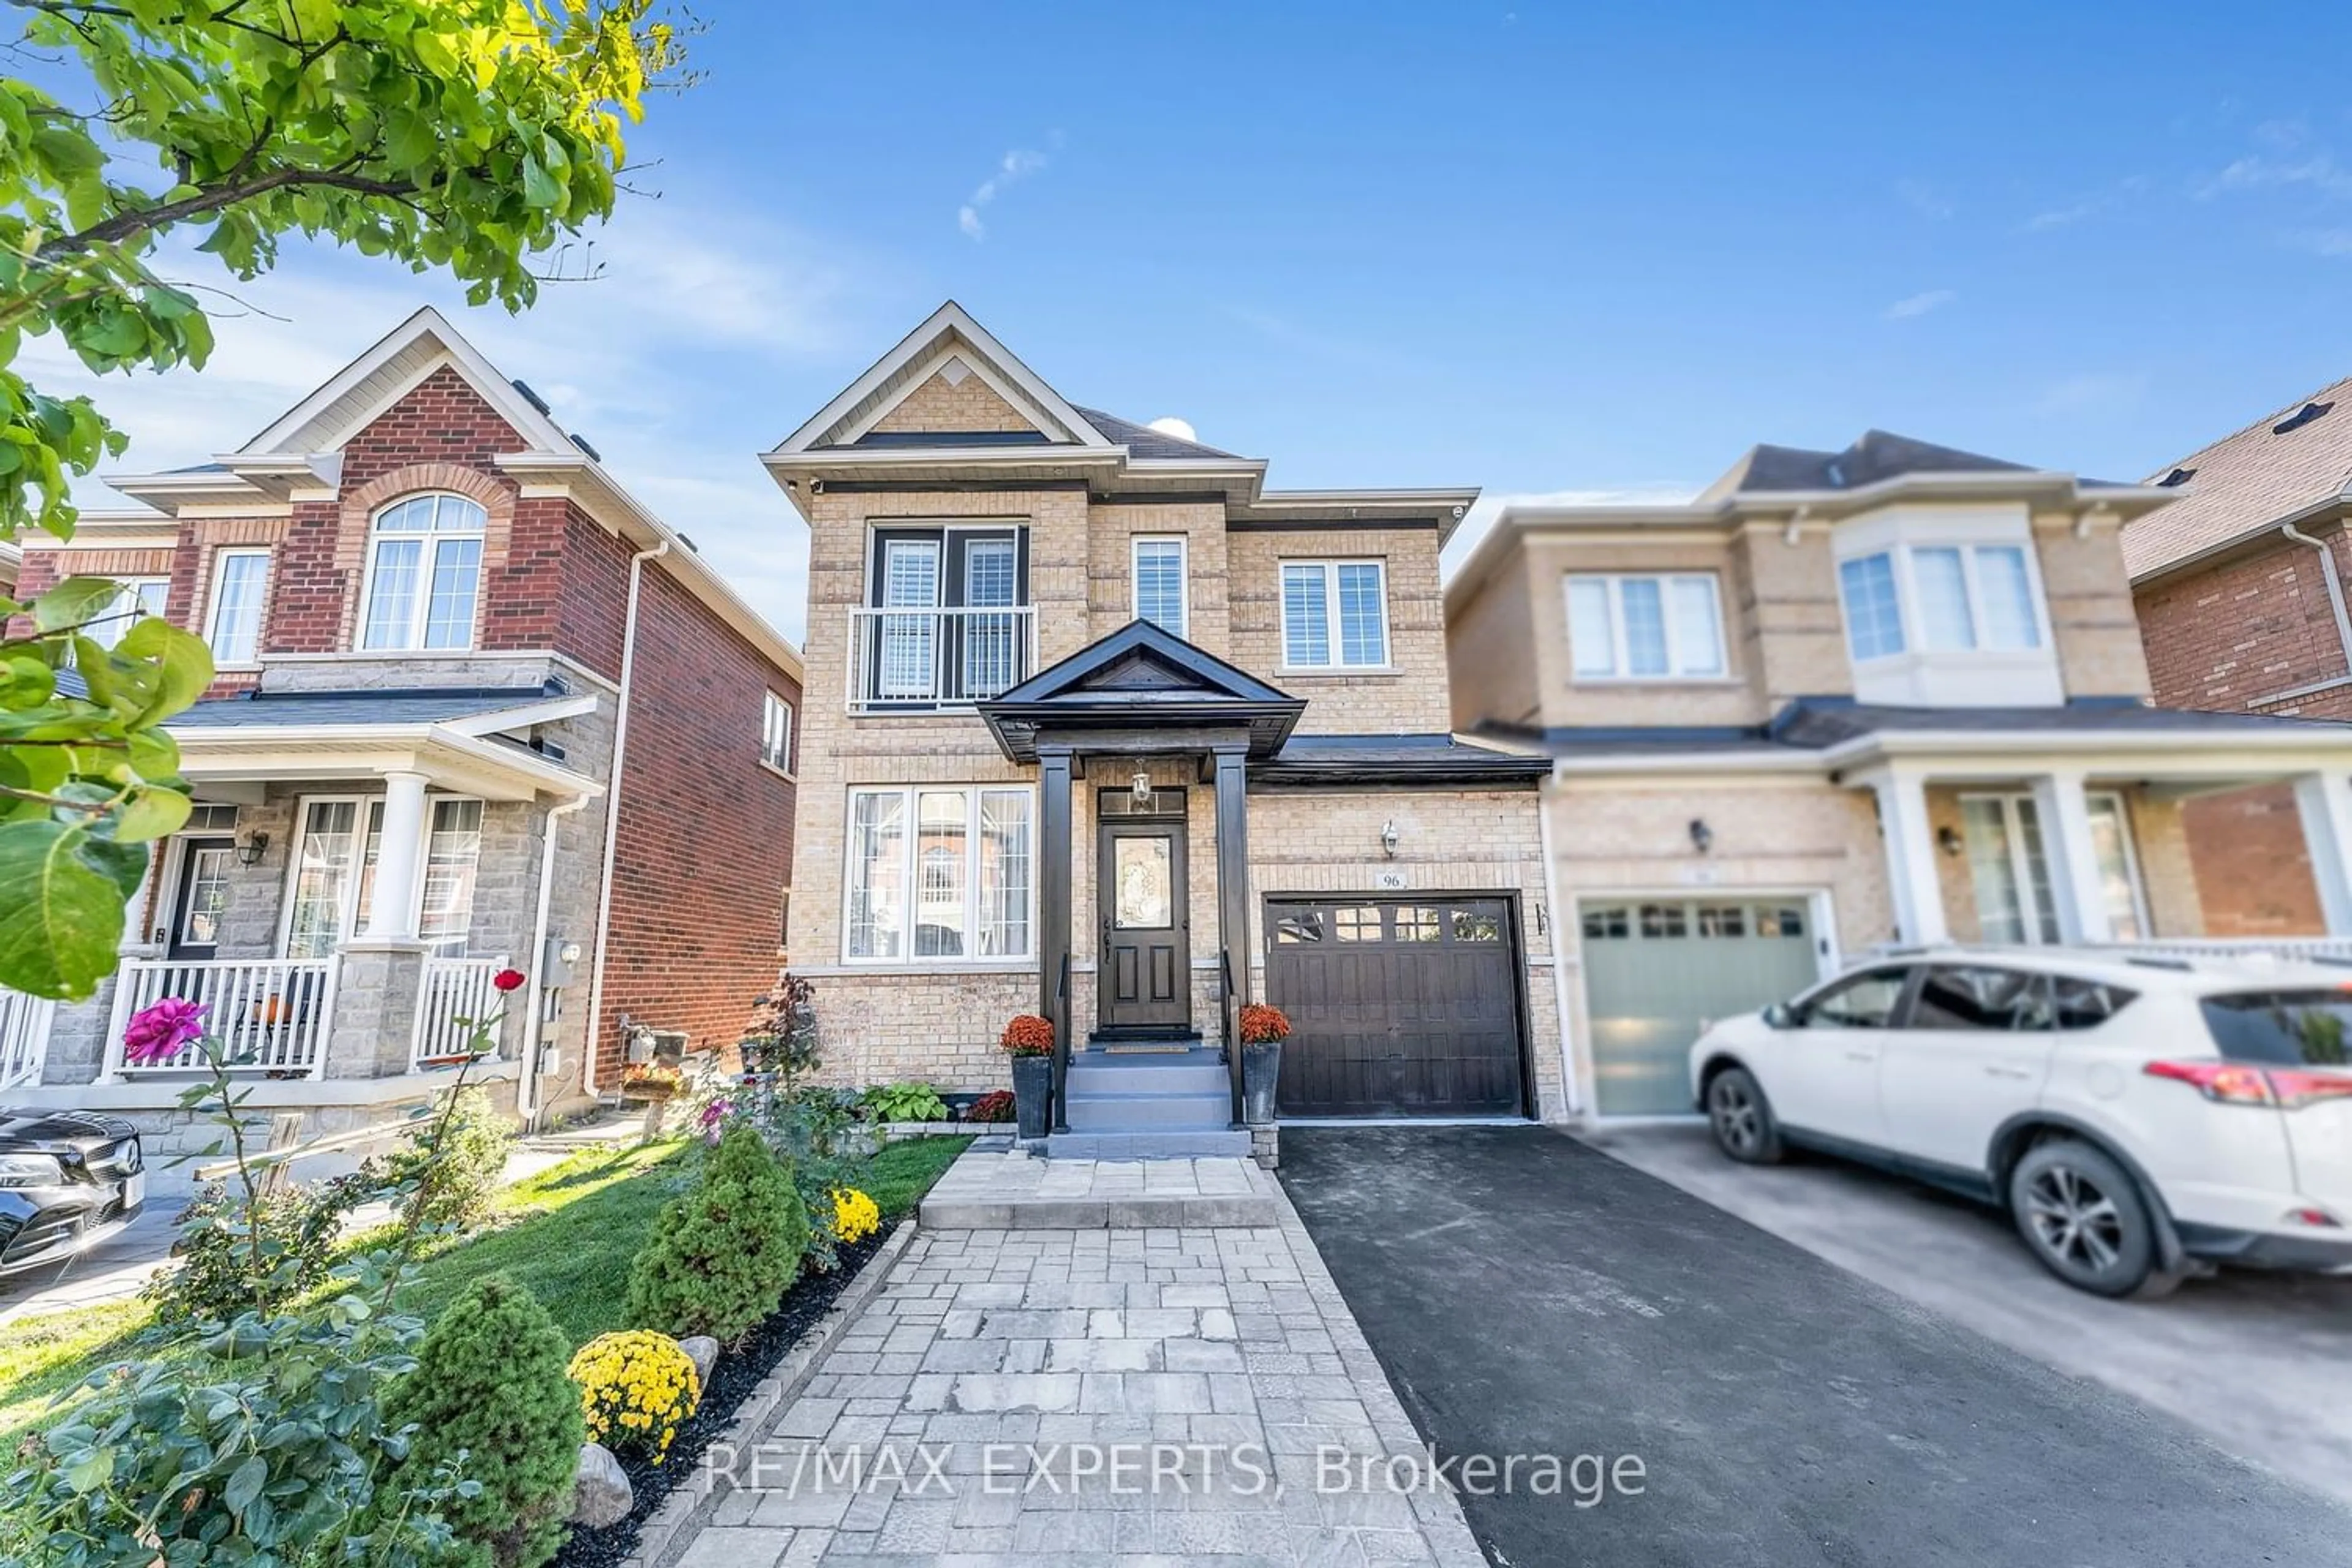 Home with brick exterior material for 96 Pelee Ave, Vaughan Ontario L4H 3Z2